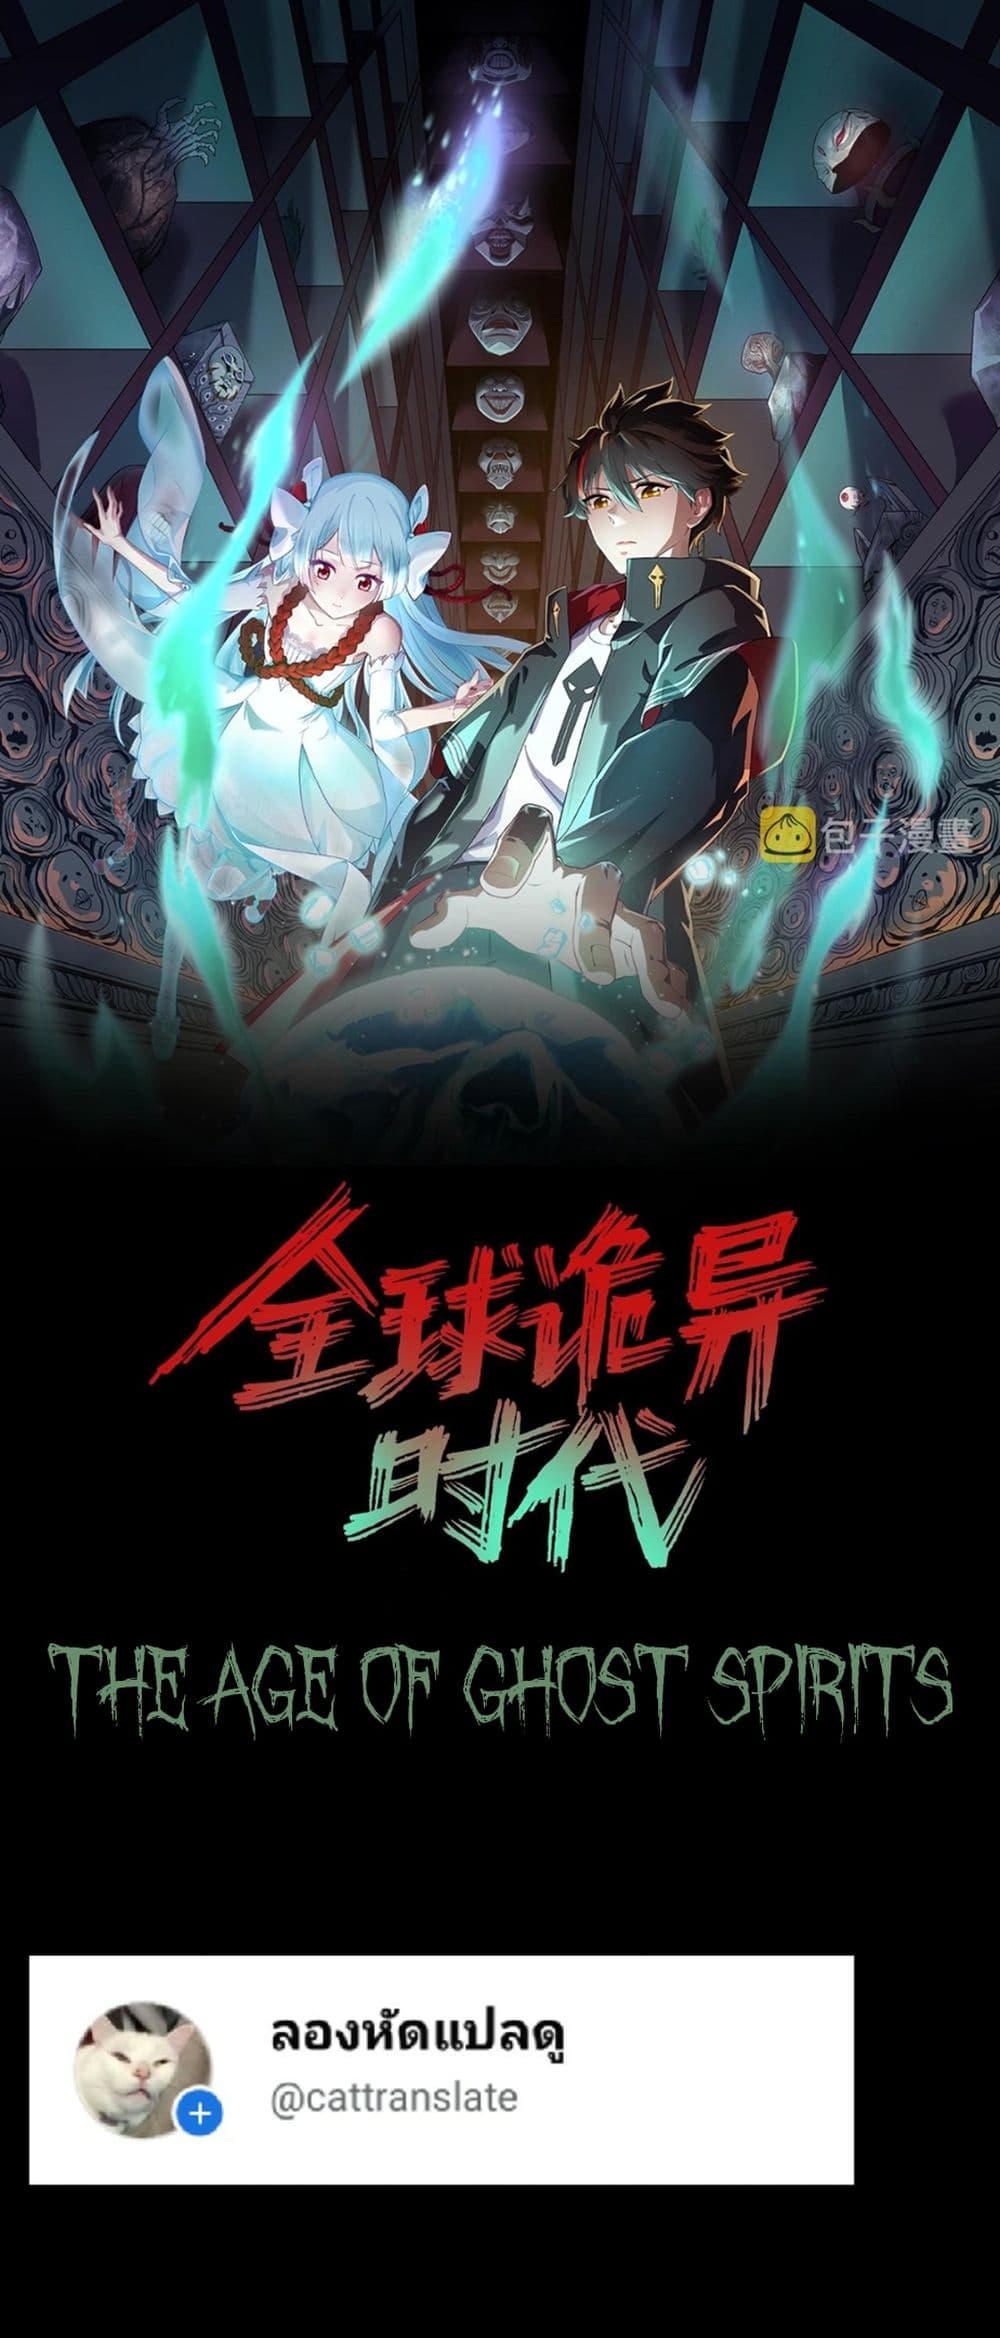 The Age of Ghost Spirits à¸à¸­à¸à¸à¸µà¹ 2 (1)